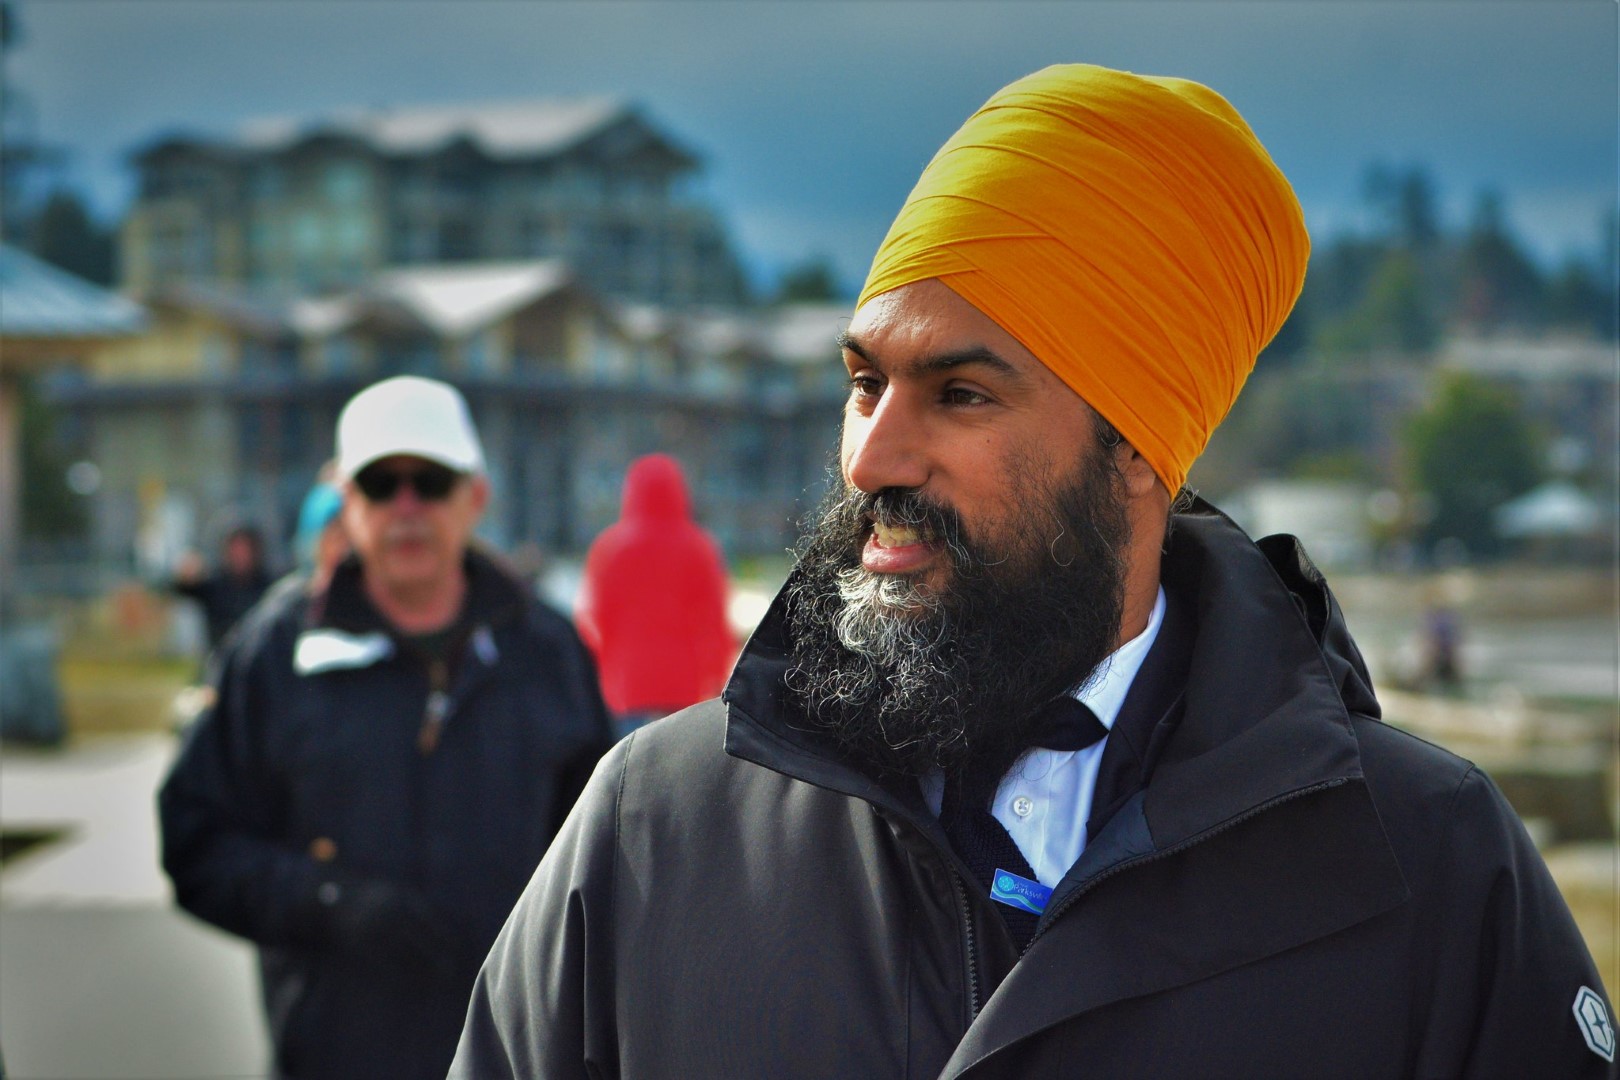 The ‘Other Press’ interviews NDP party leader Jagmeet Singh